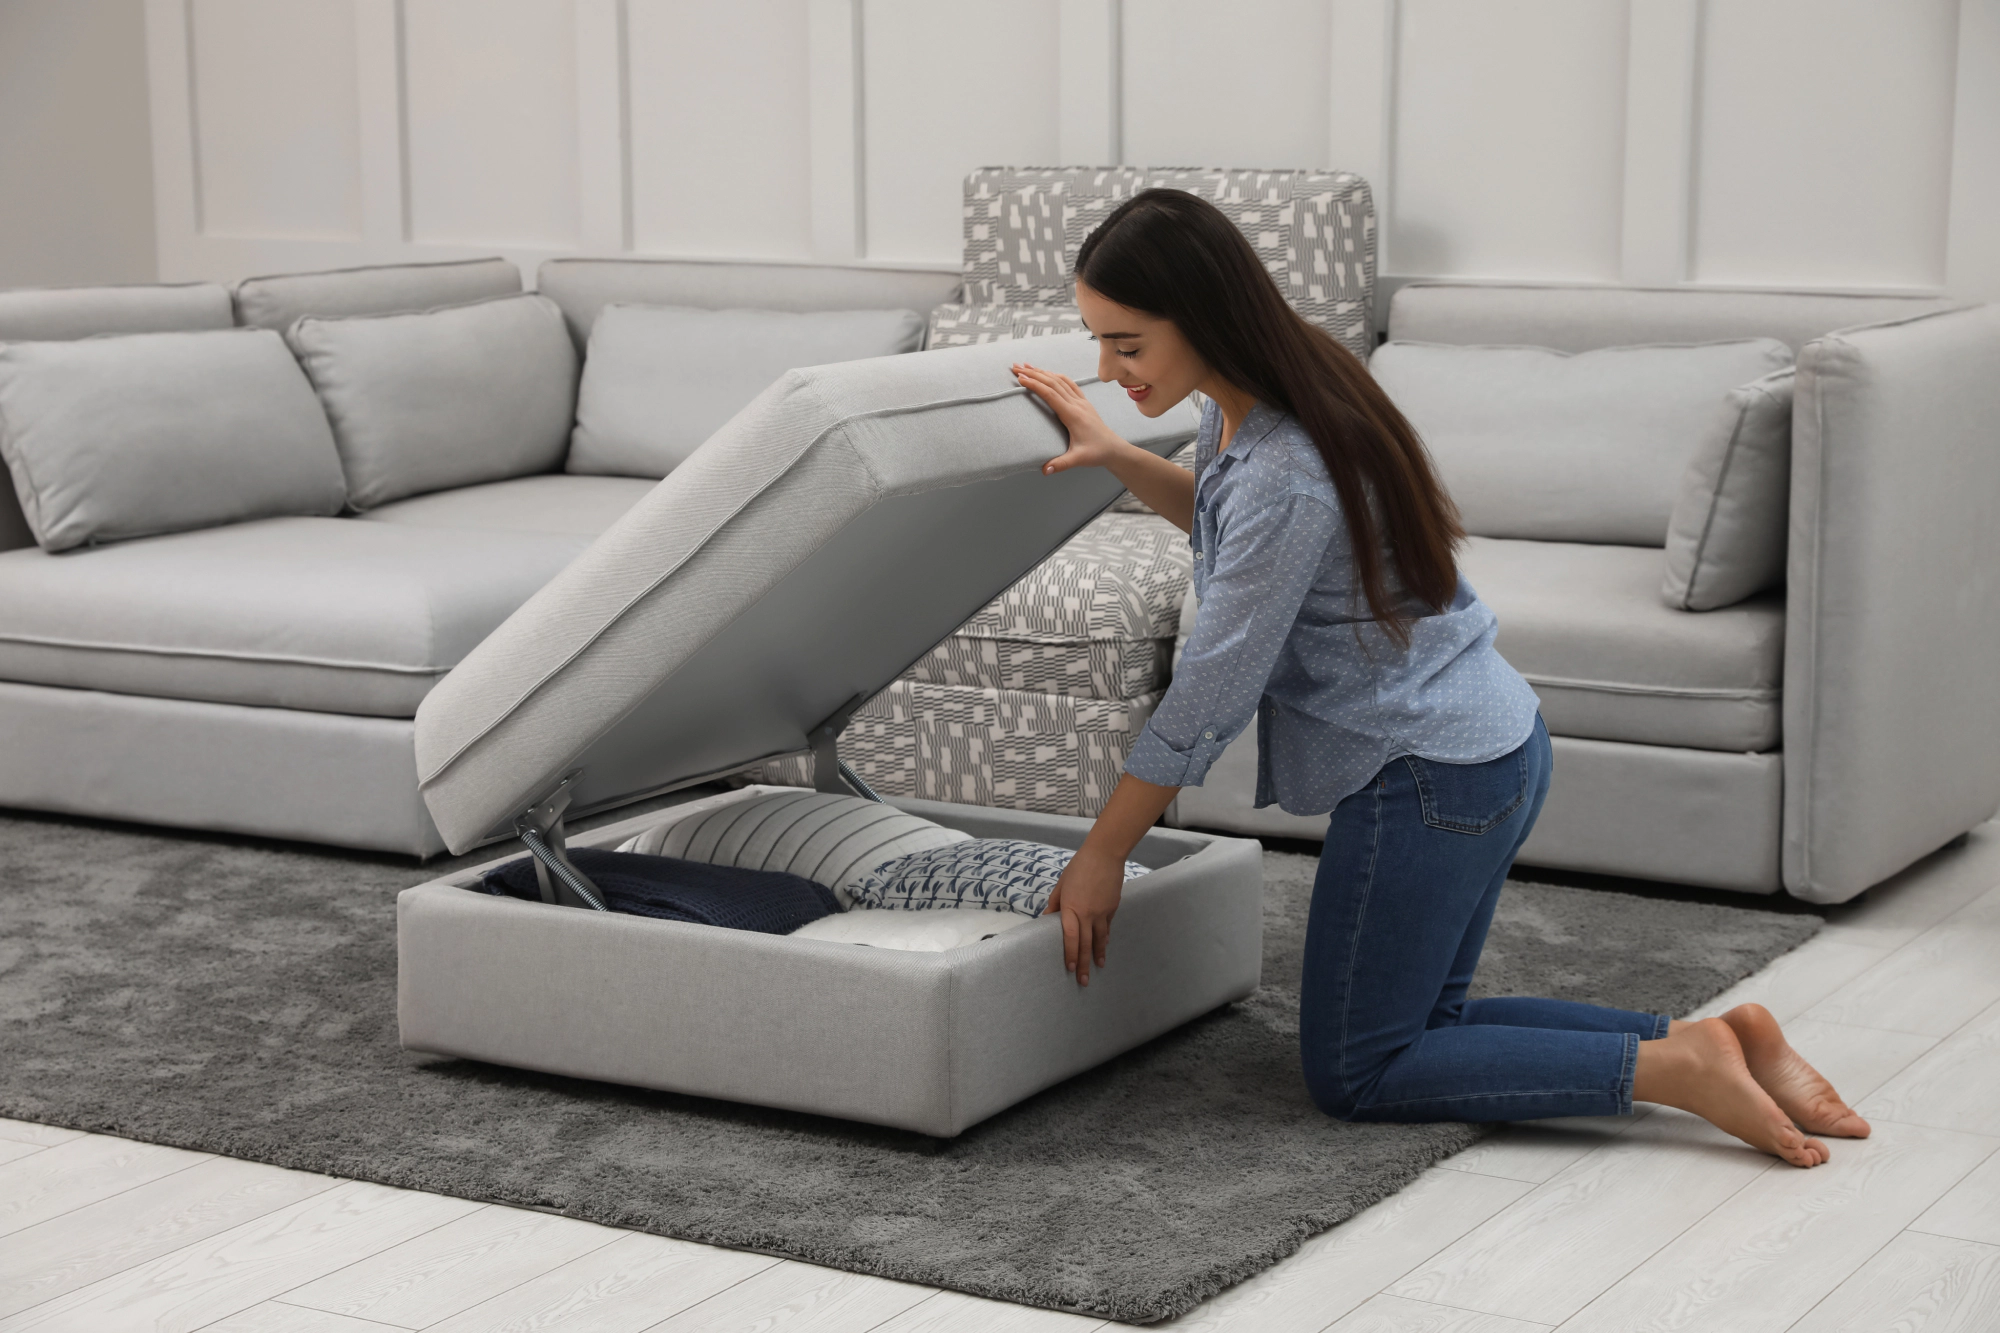 Woman opening storage ottoman in a lounge room.